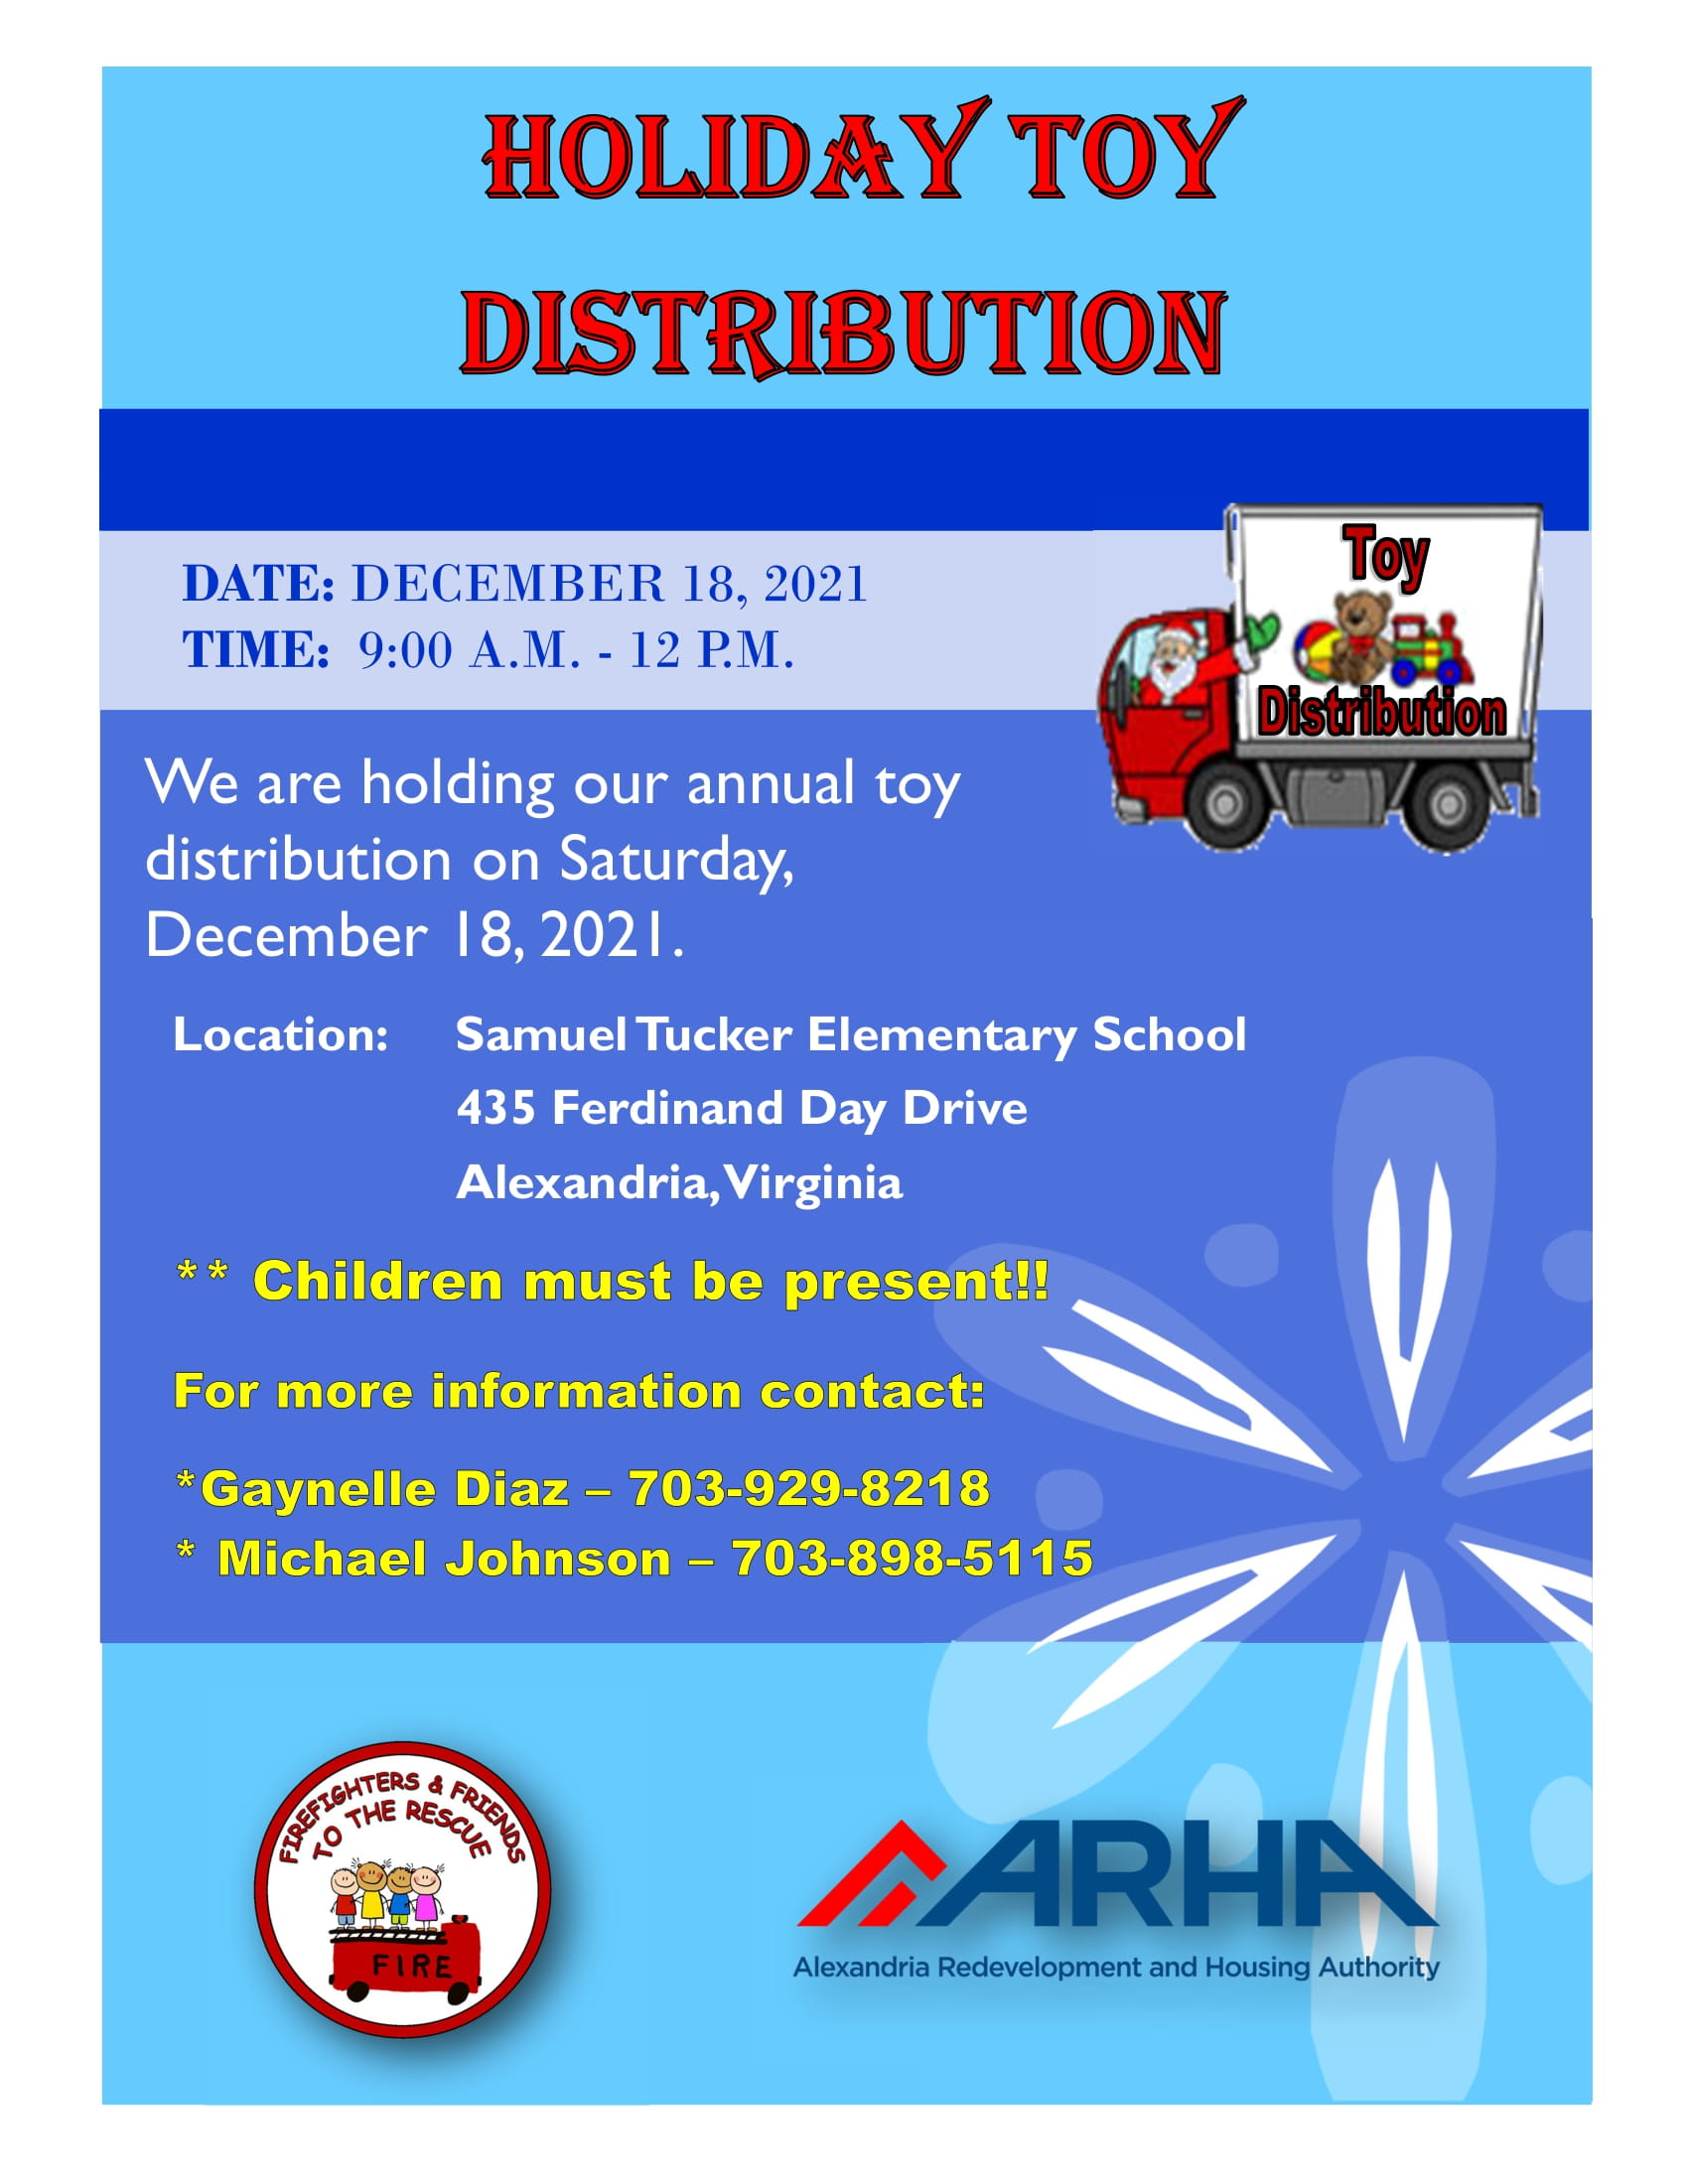 firefighter and friends toy drive